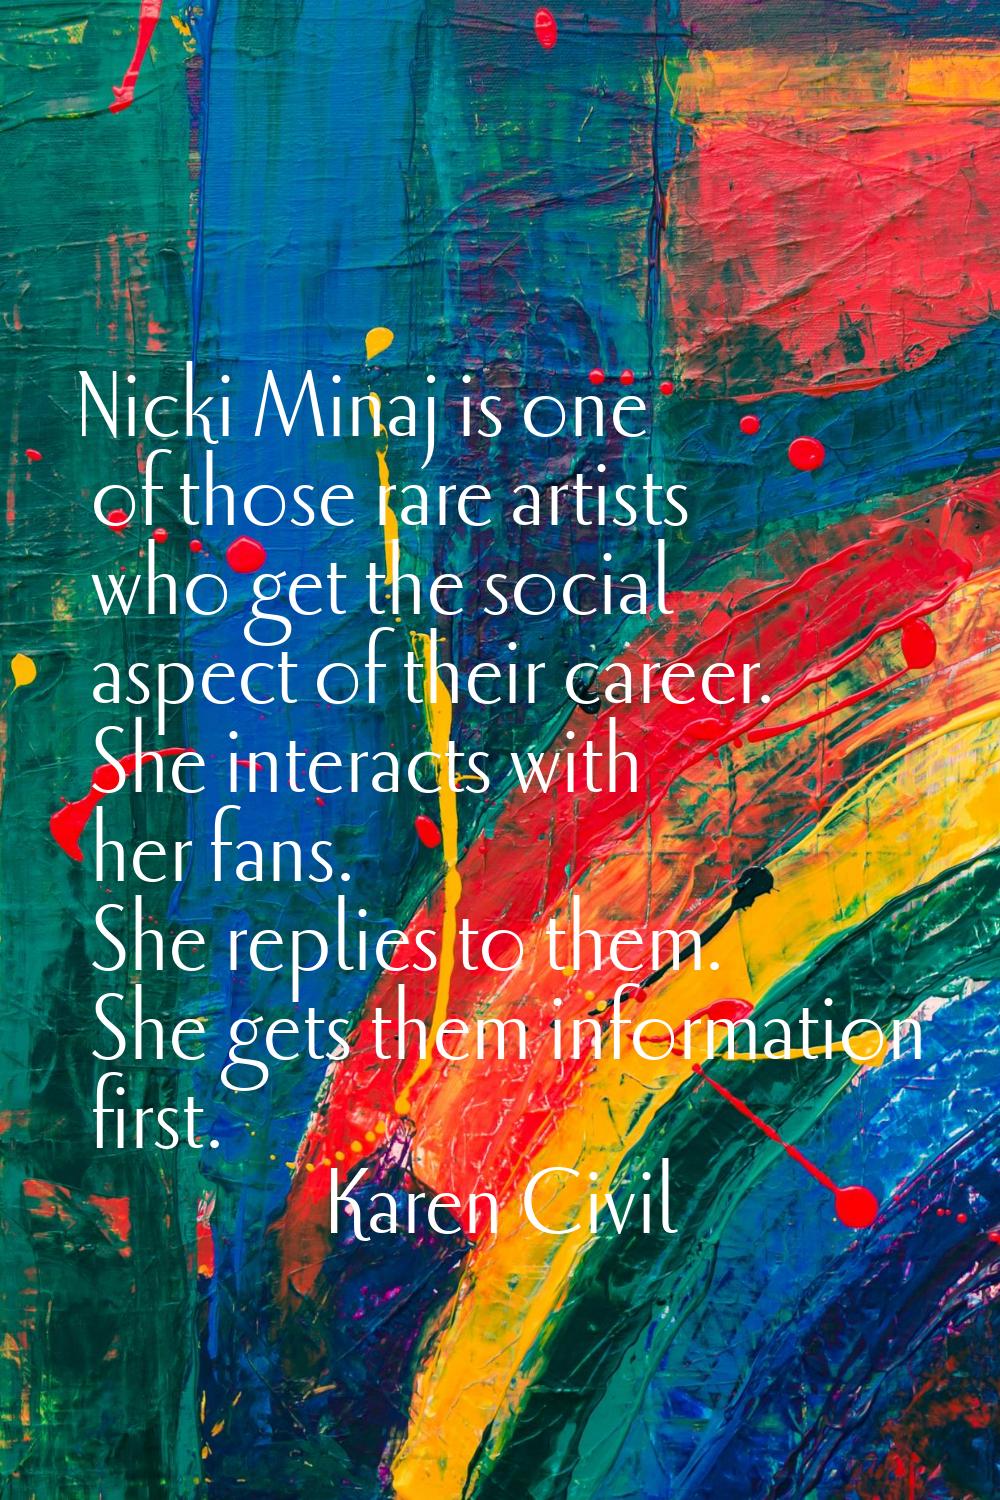 Nicki Minaj is one of those rare artists who get the social aspect of their career. She interacts w